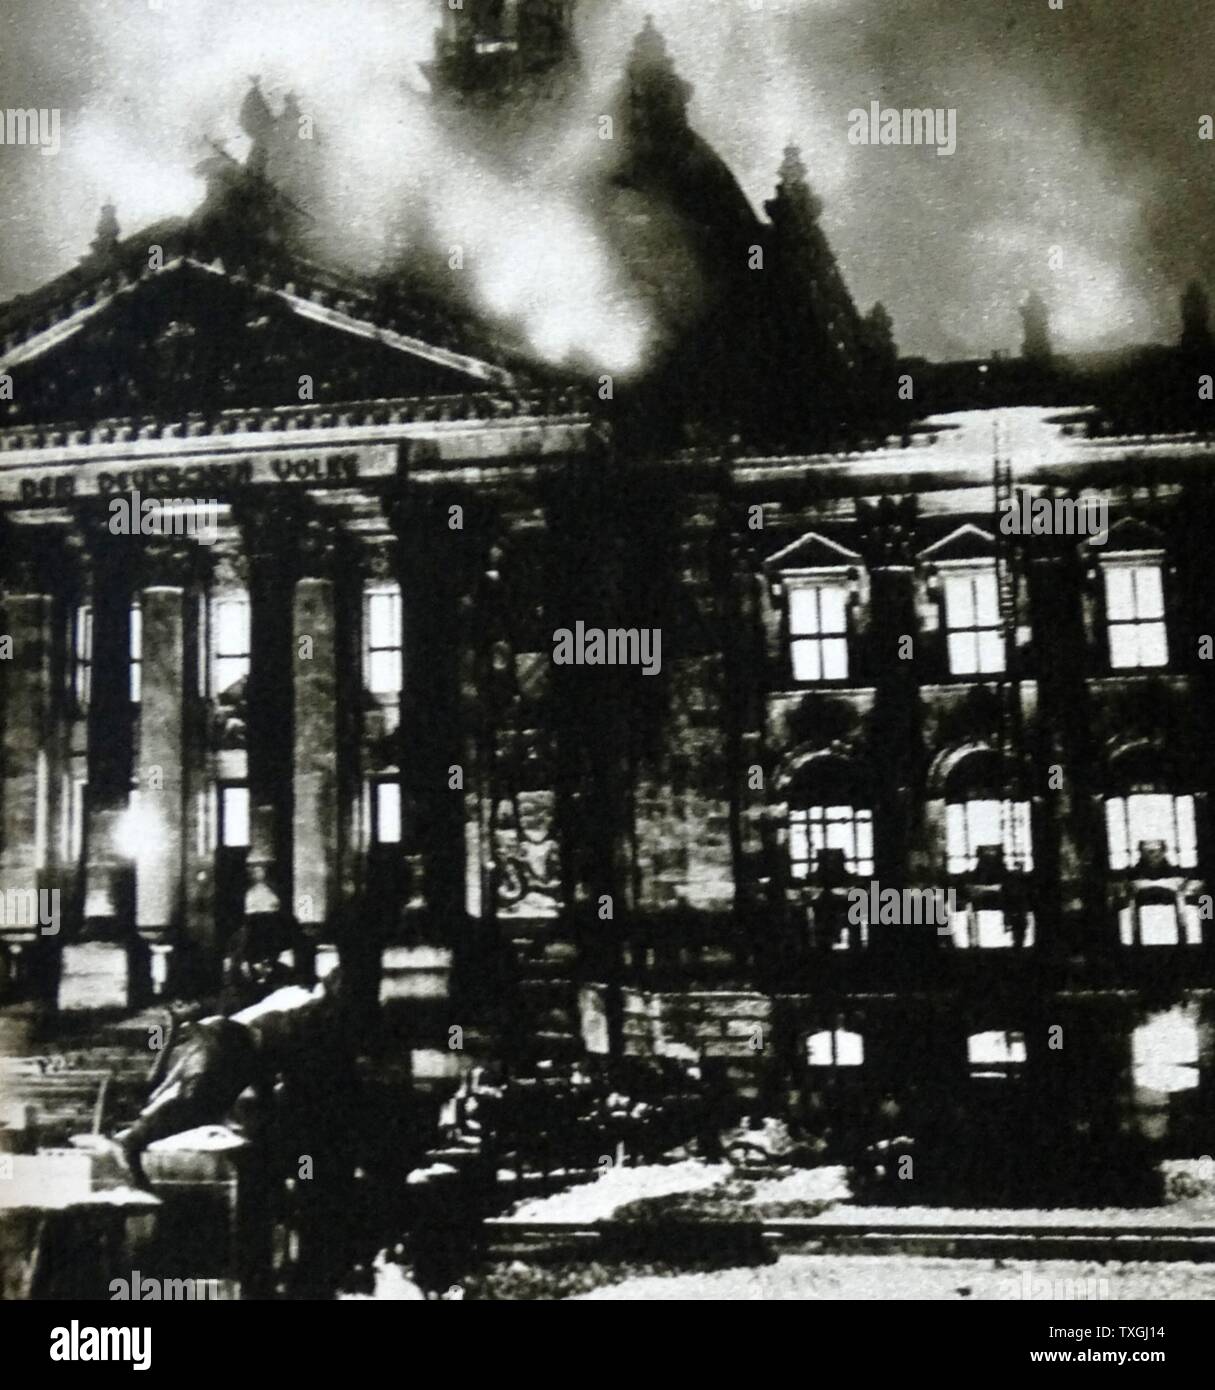 Photographic print of the Reichstag Building on Fire, set by Marinus van der Lubbe (1909-1934) a Dutch council communist. Dated 20th Century Stock Photo